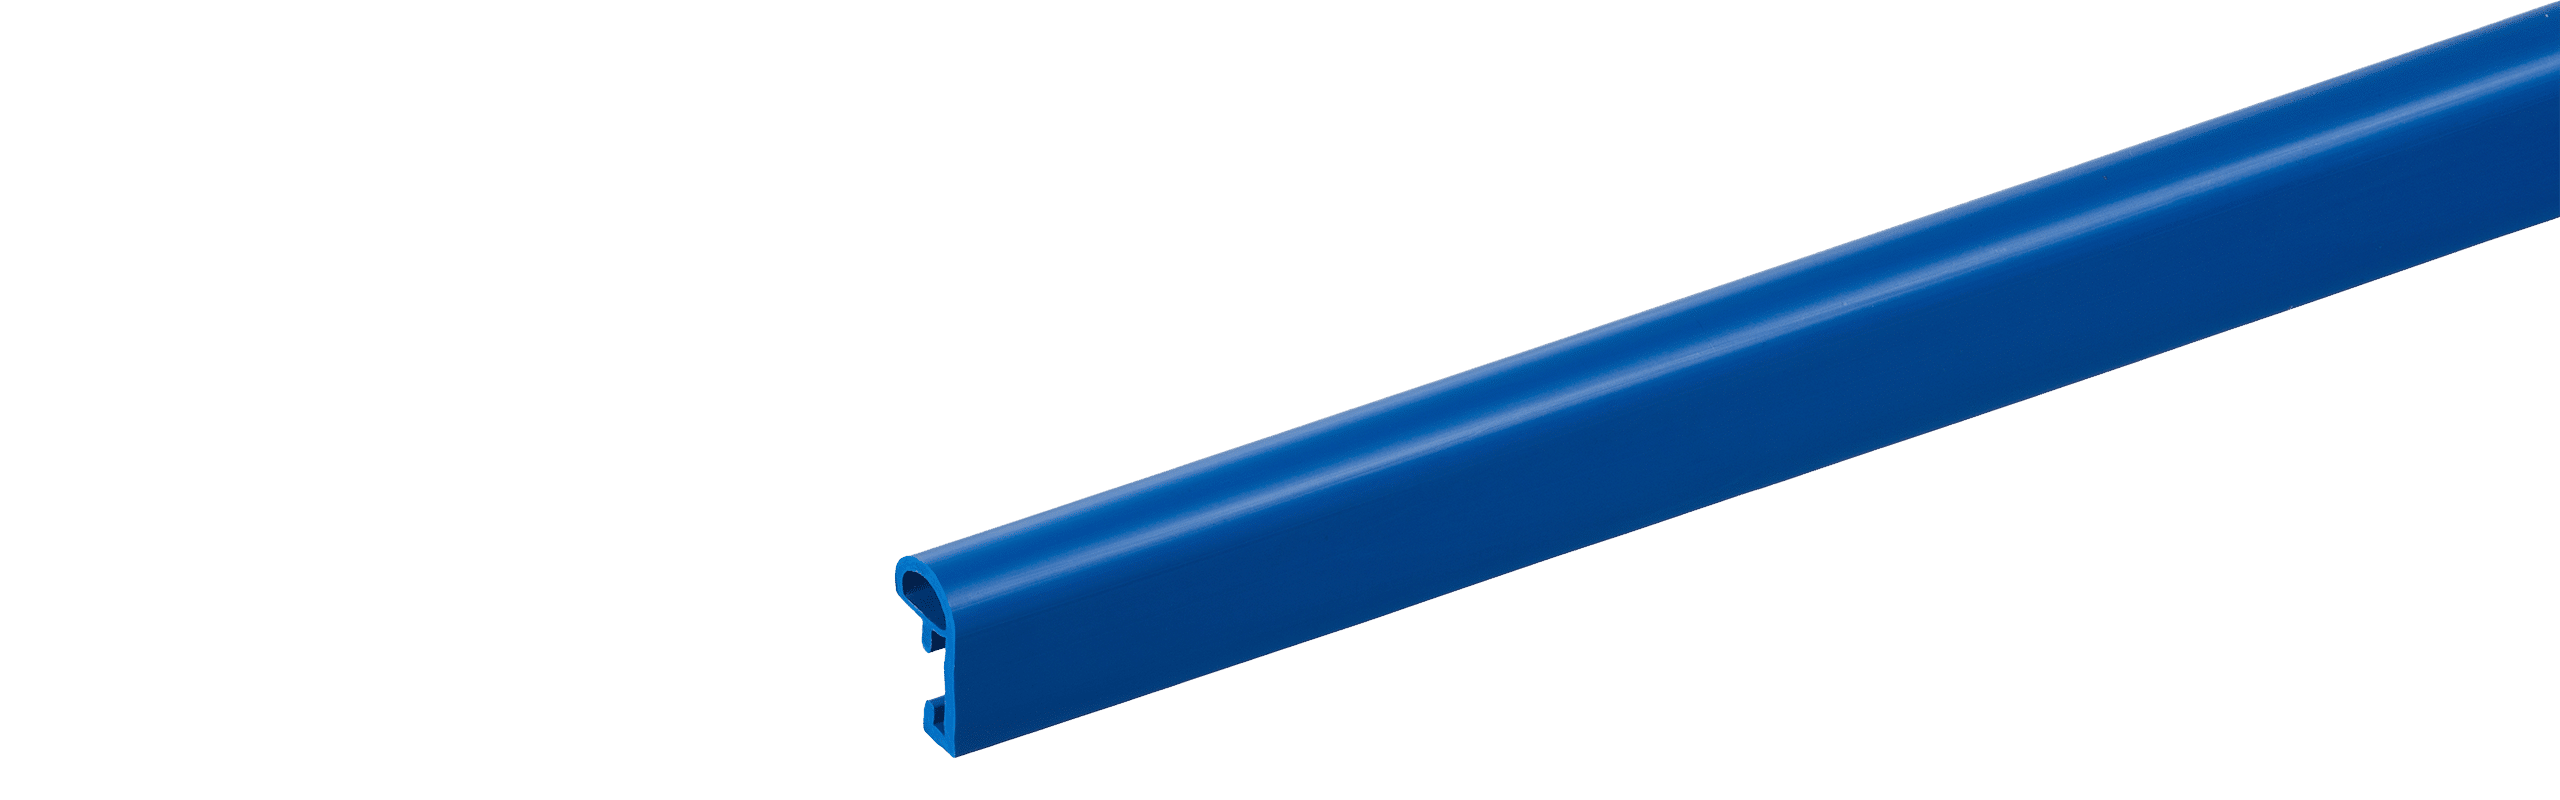 Plastic extrusion Global Suppliers